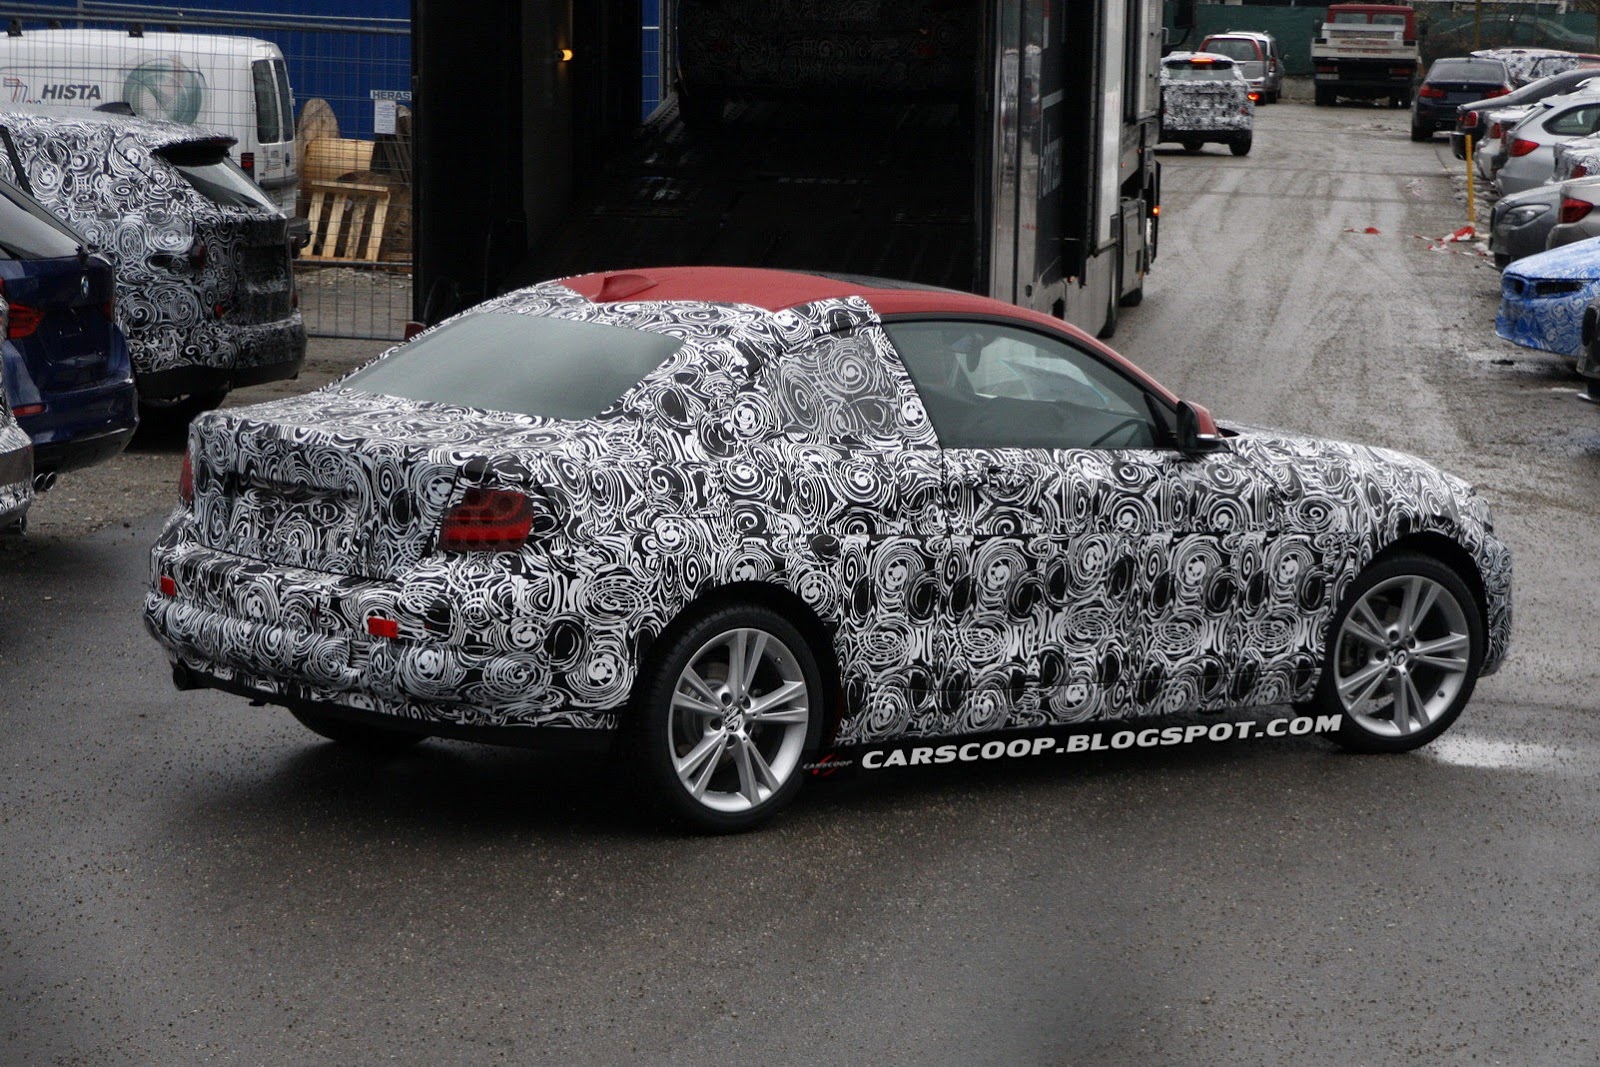 BMW 2 Series Coupe spied